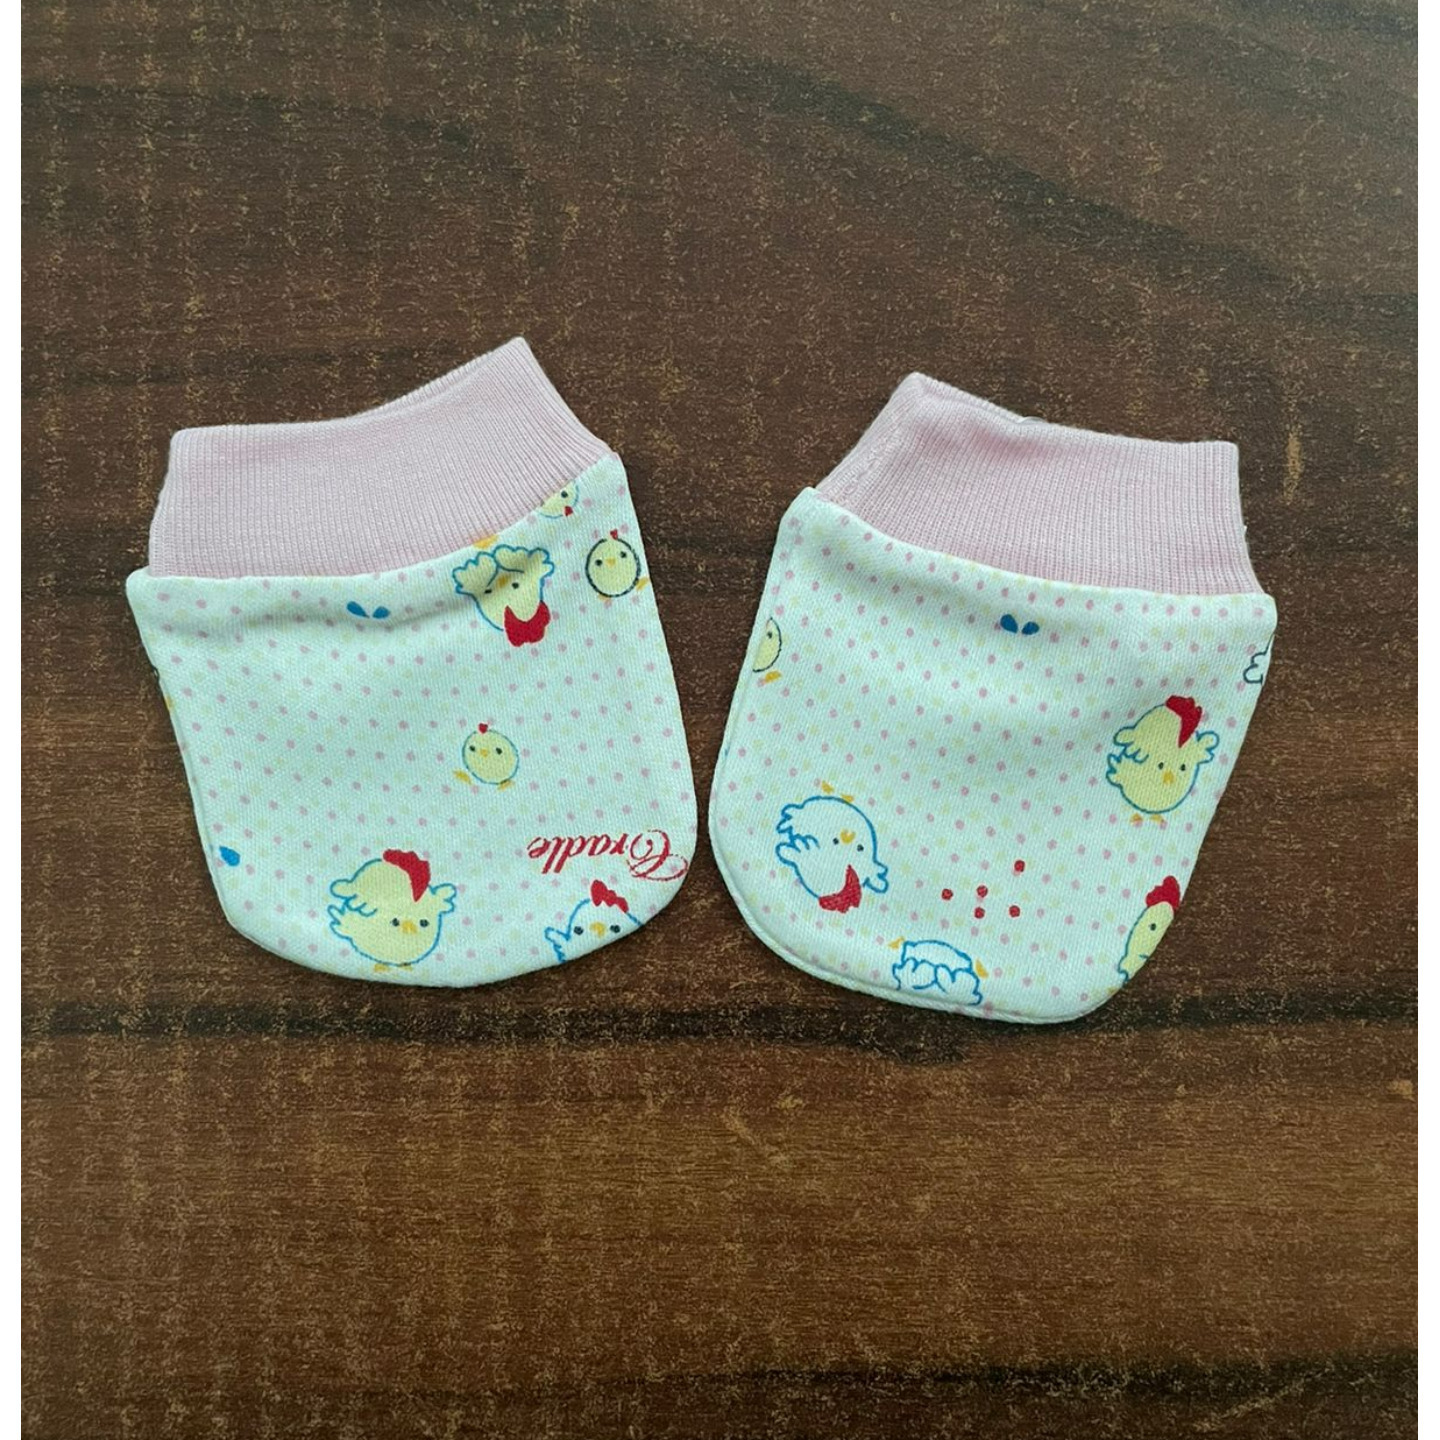 Cradle Togs Mittens Rs 65 Only NewBorn babies